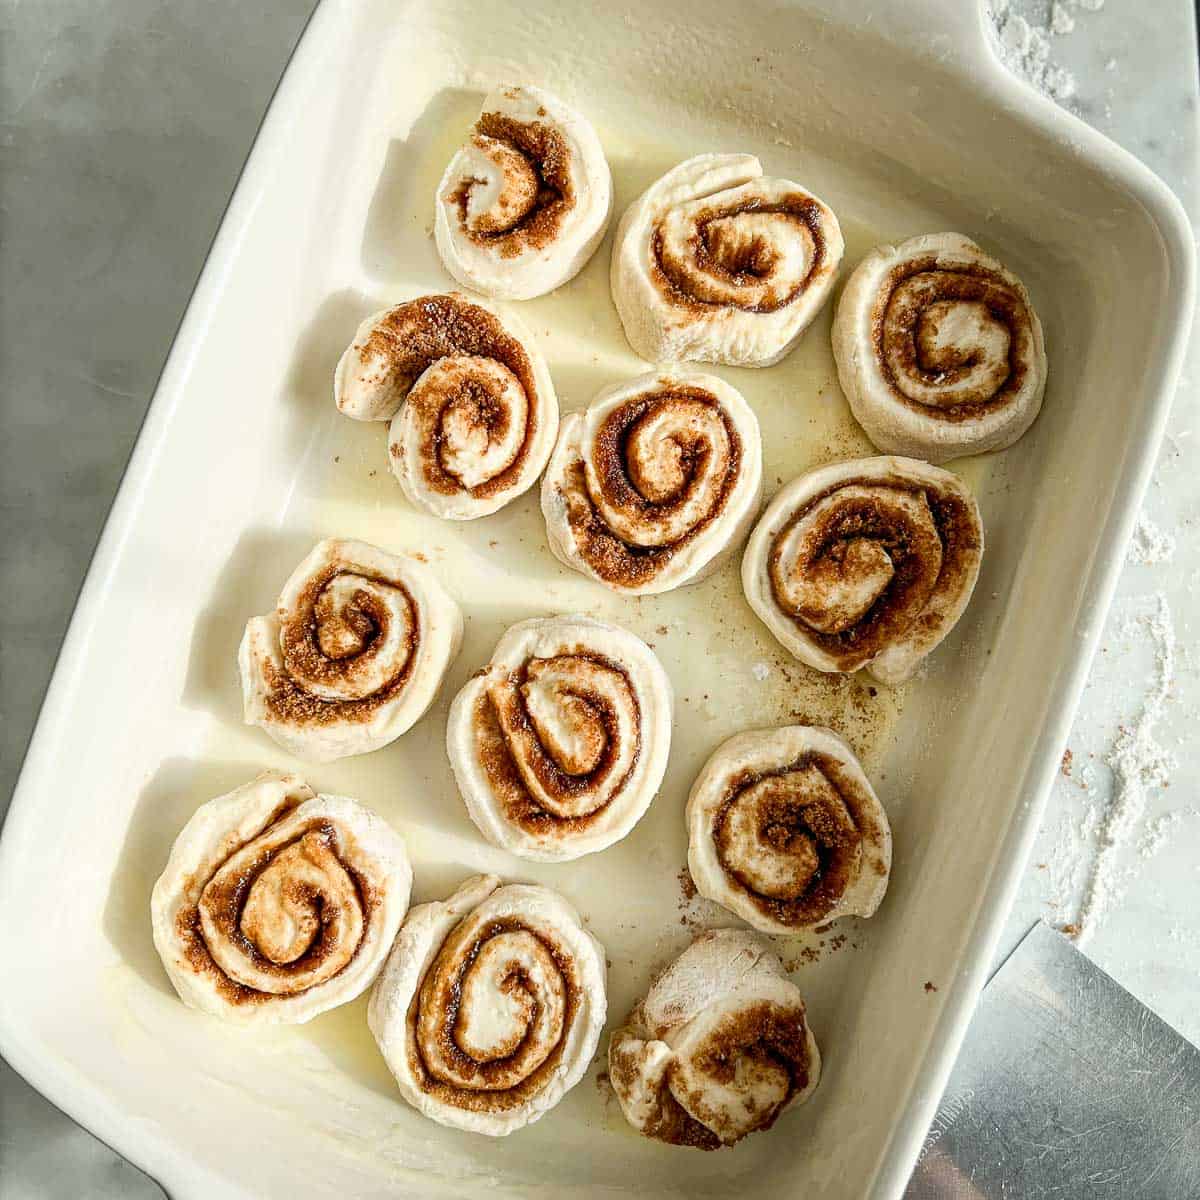 Unbaked cinnamon rolls transferred into a buttered baking dish.